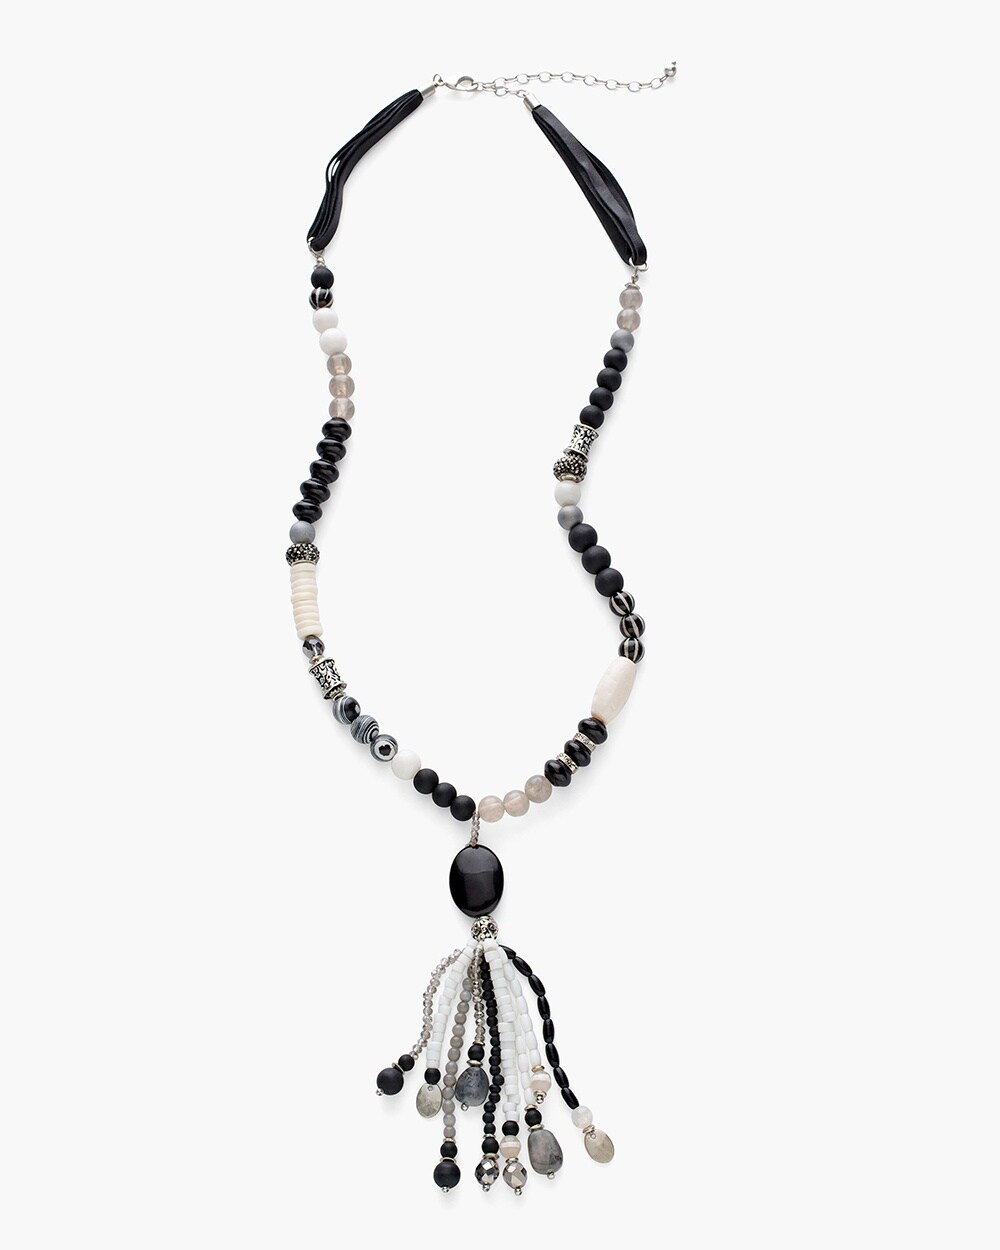 Long Black and White Tassel Necklace